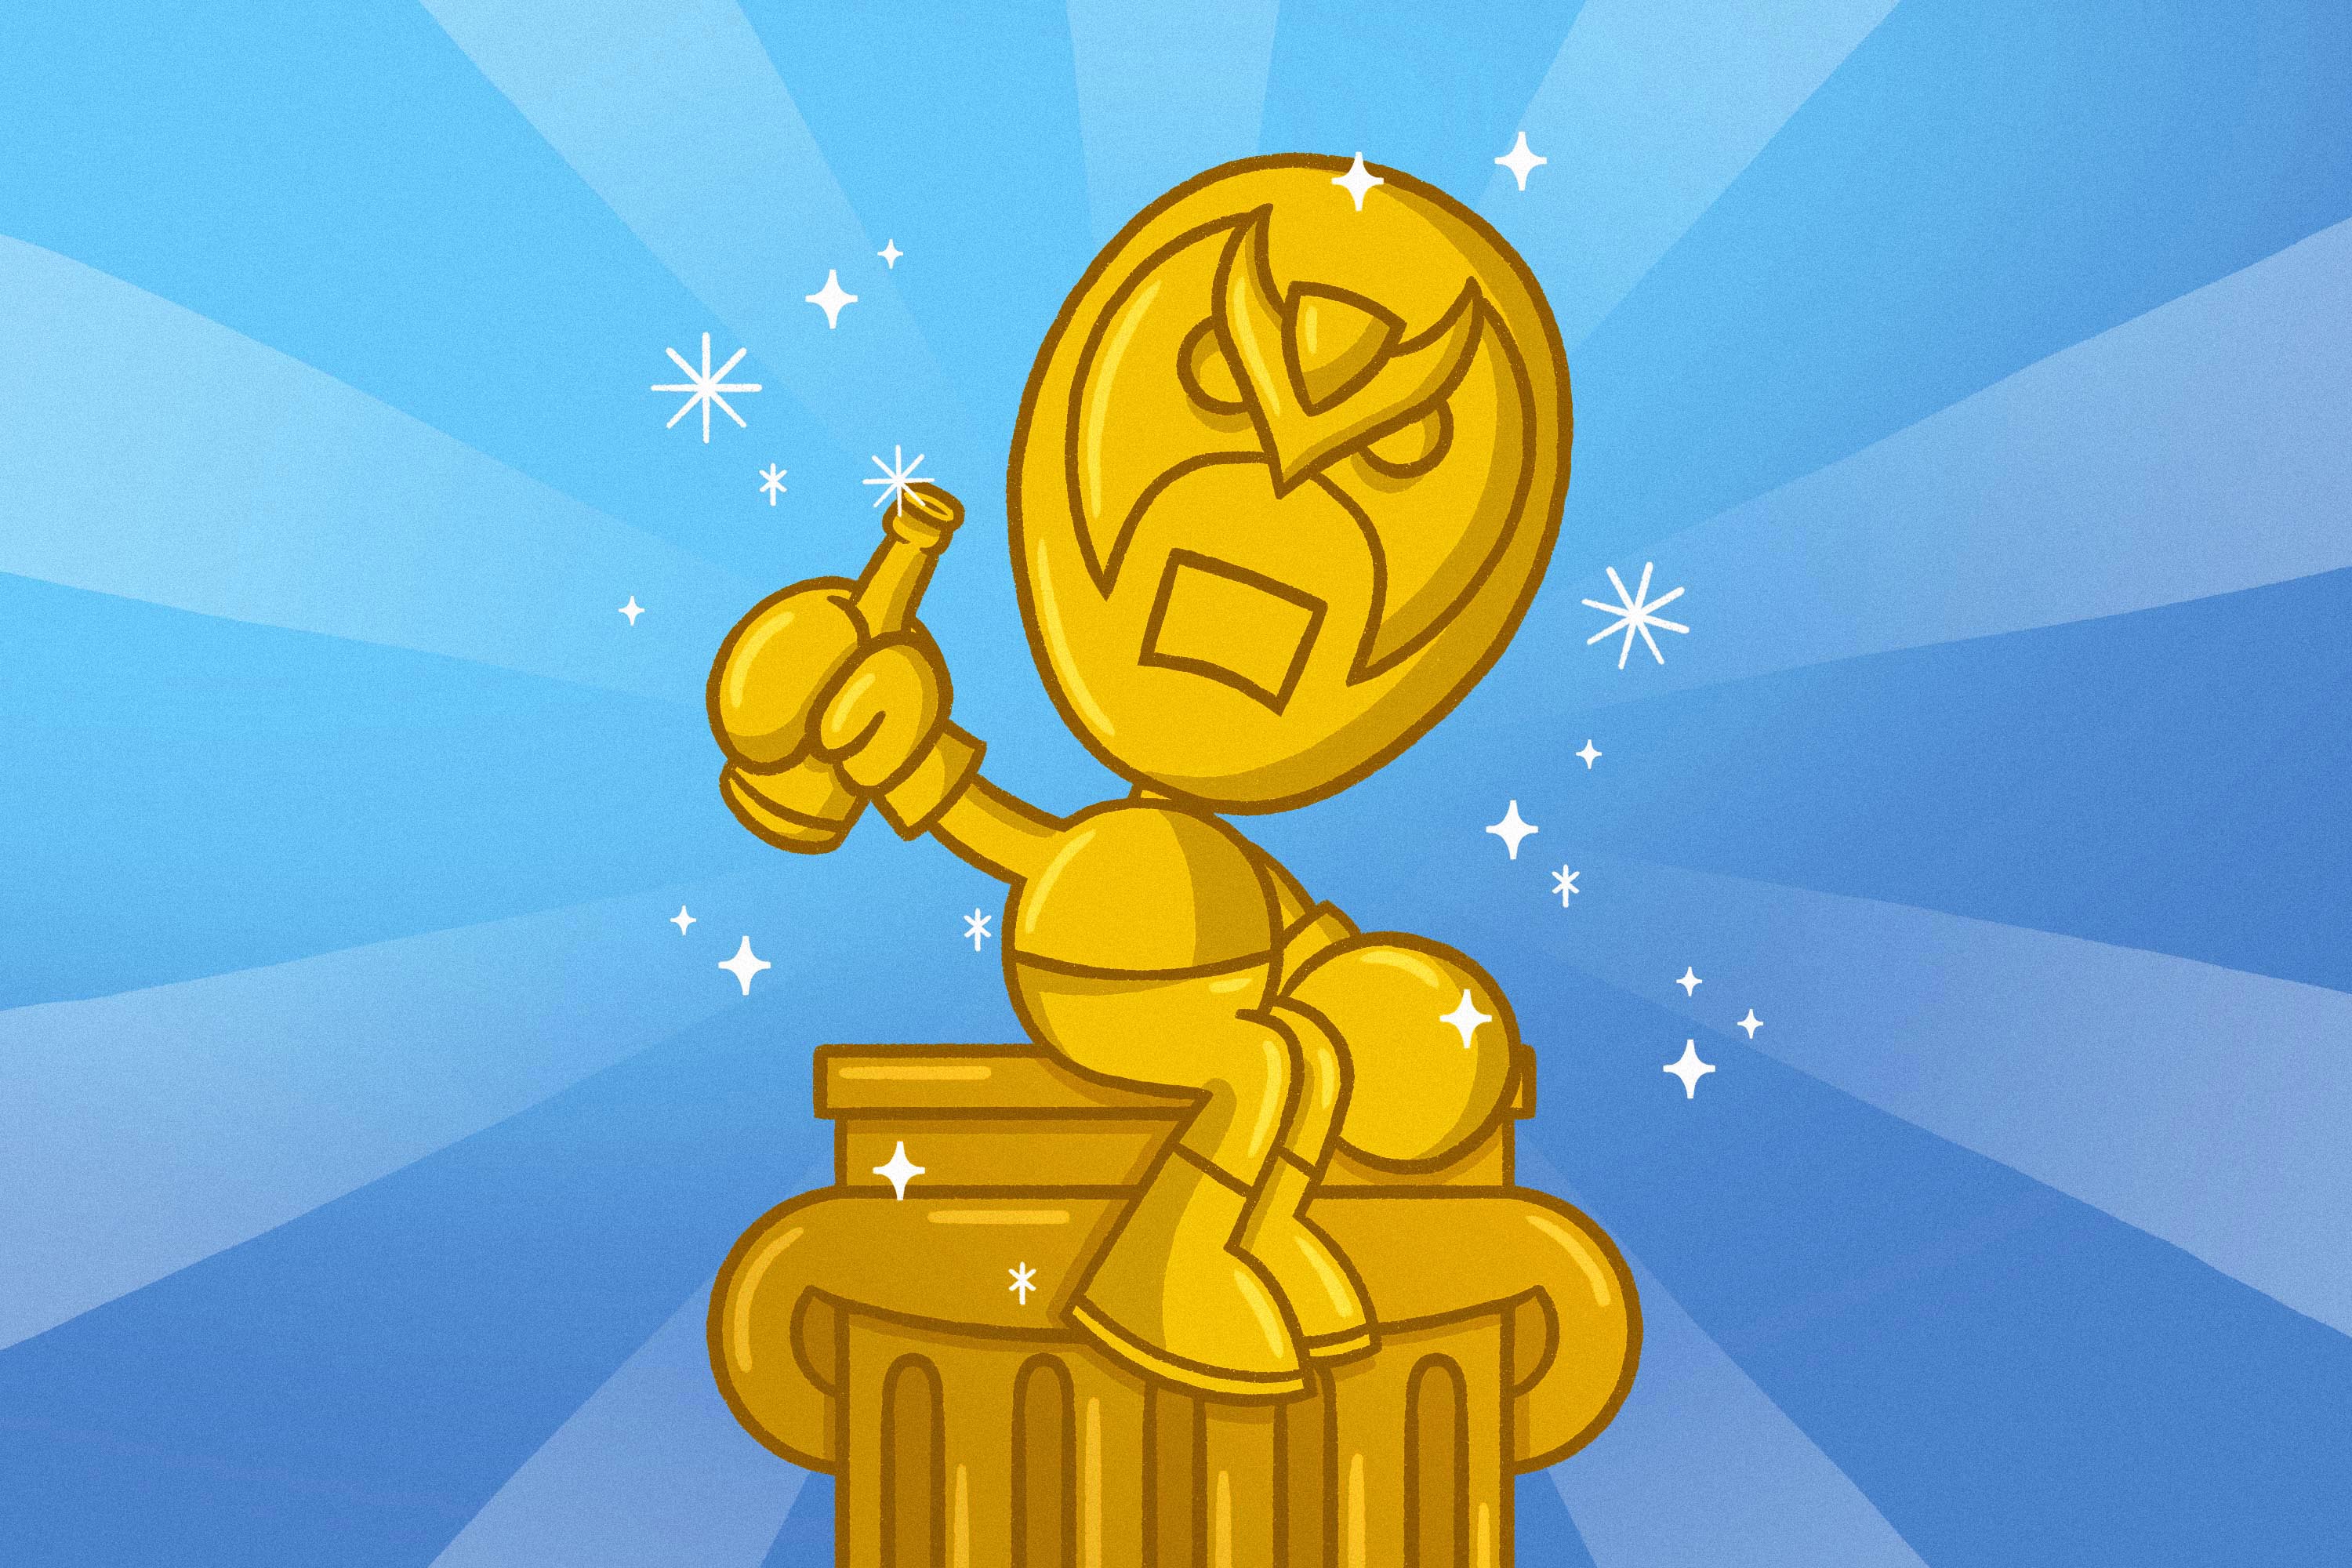 gold version of the Strong Bad character sits atop a gold column